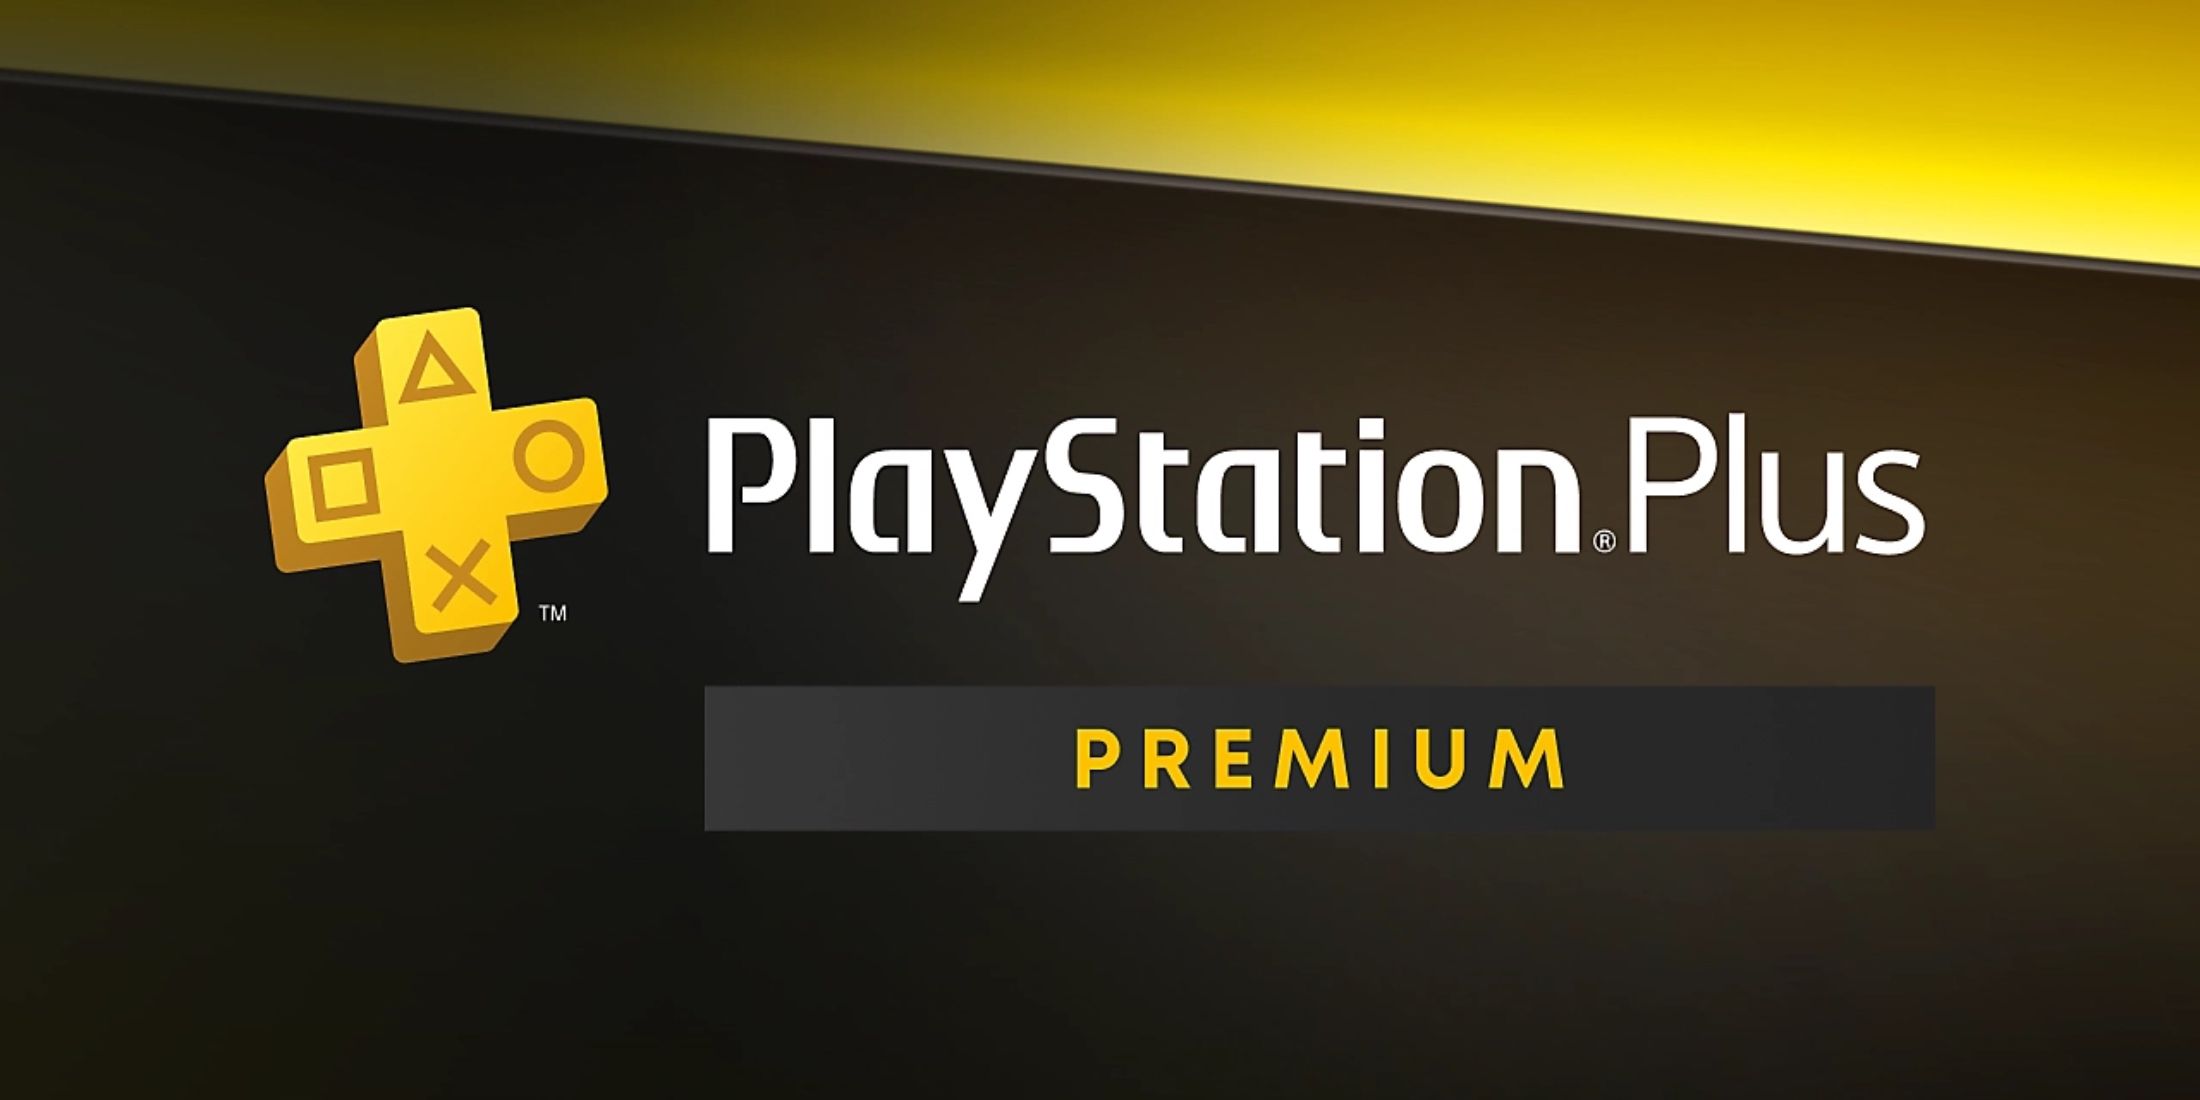 playstation-players-getting-free-ps-plus-premium